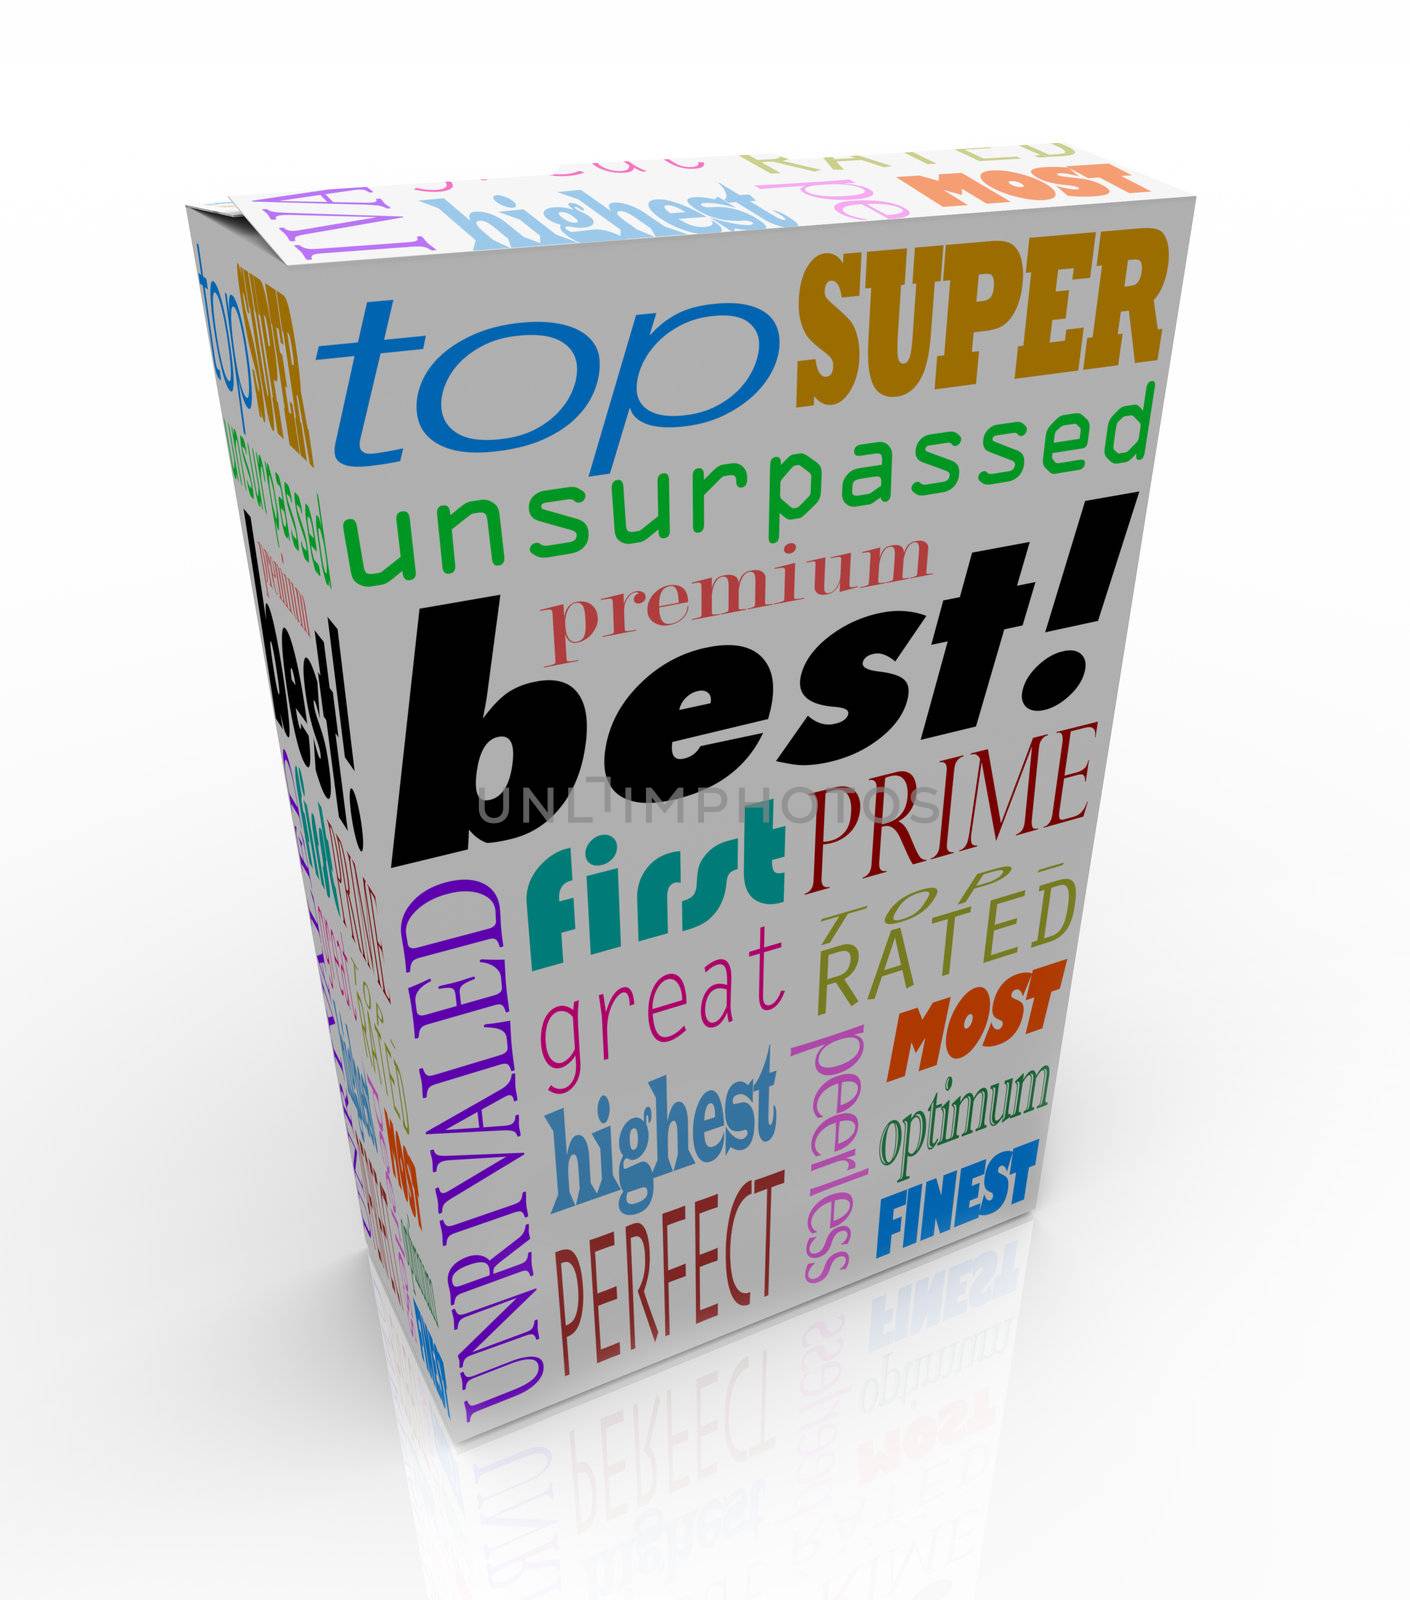 The word Best and many others representing high regard and accolades on a product box, such as top, unrivaled, perfect, premier, unsurpassed, perfect, great, most, first, and more